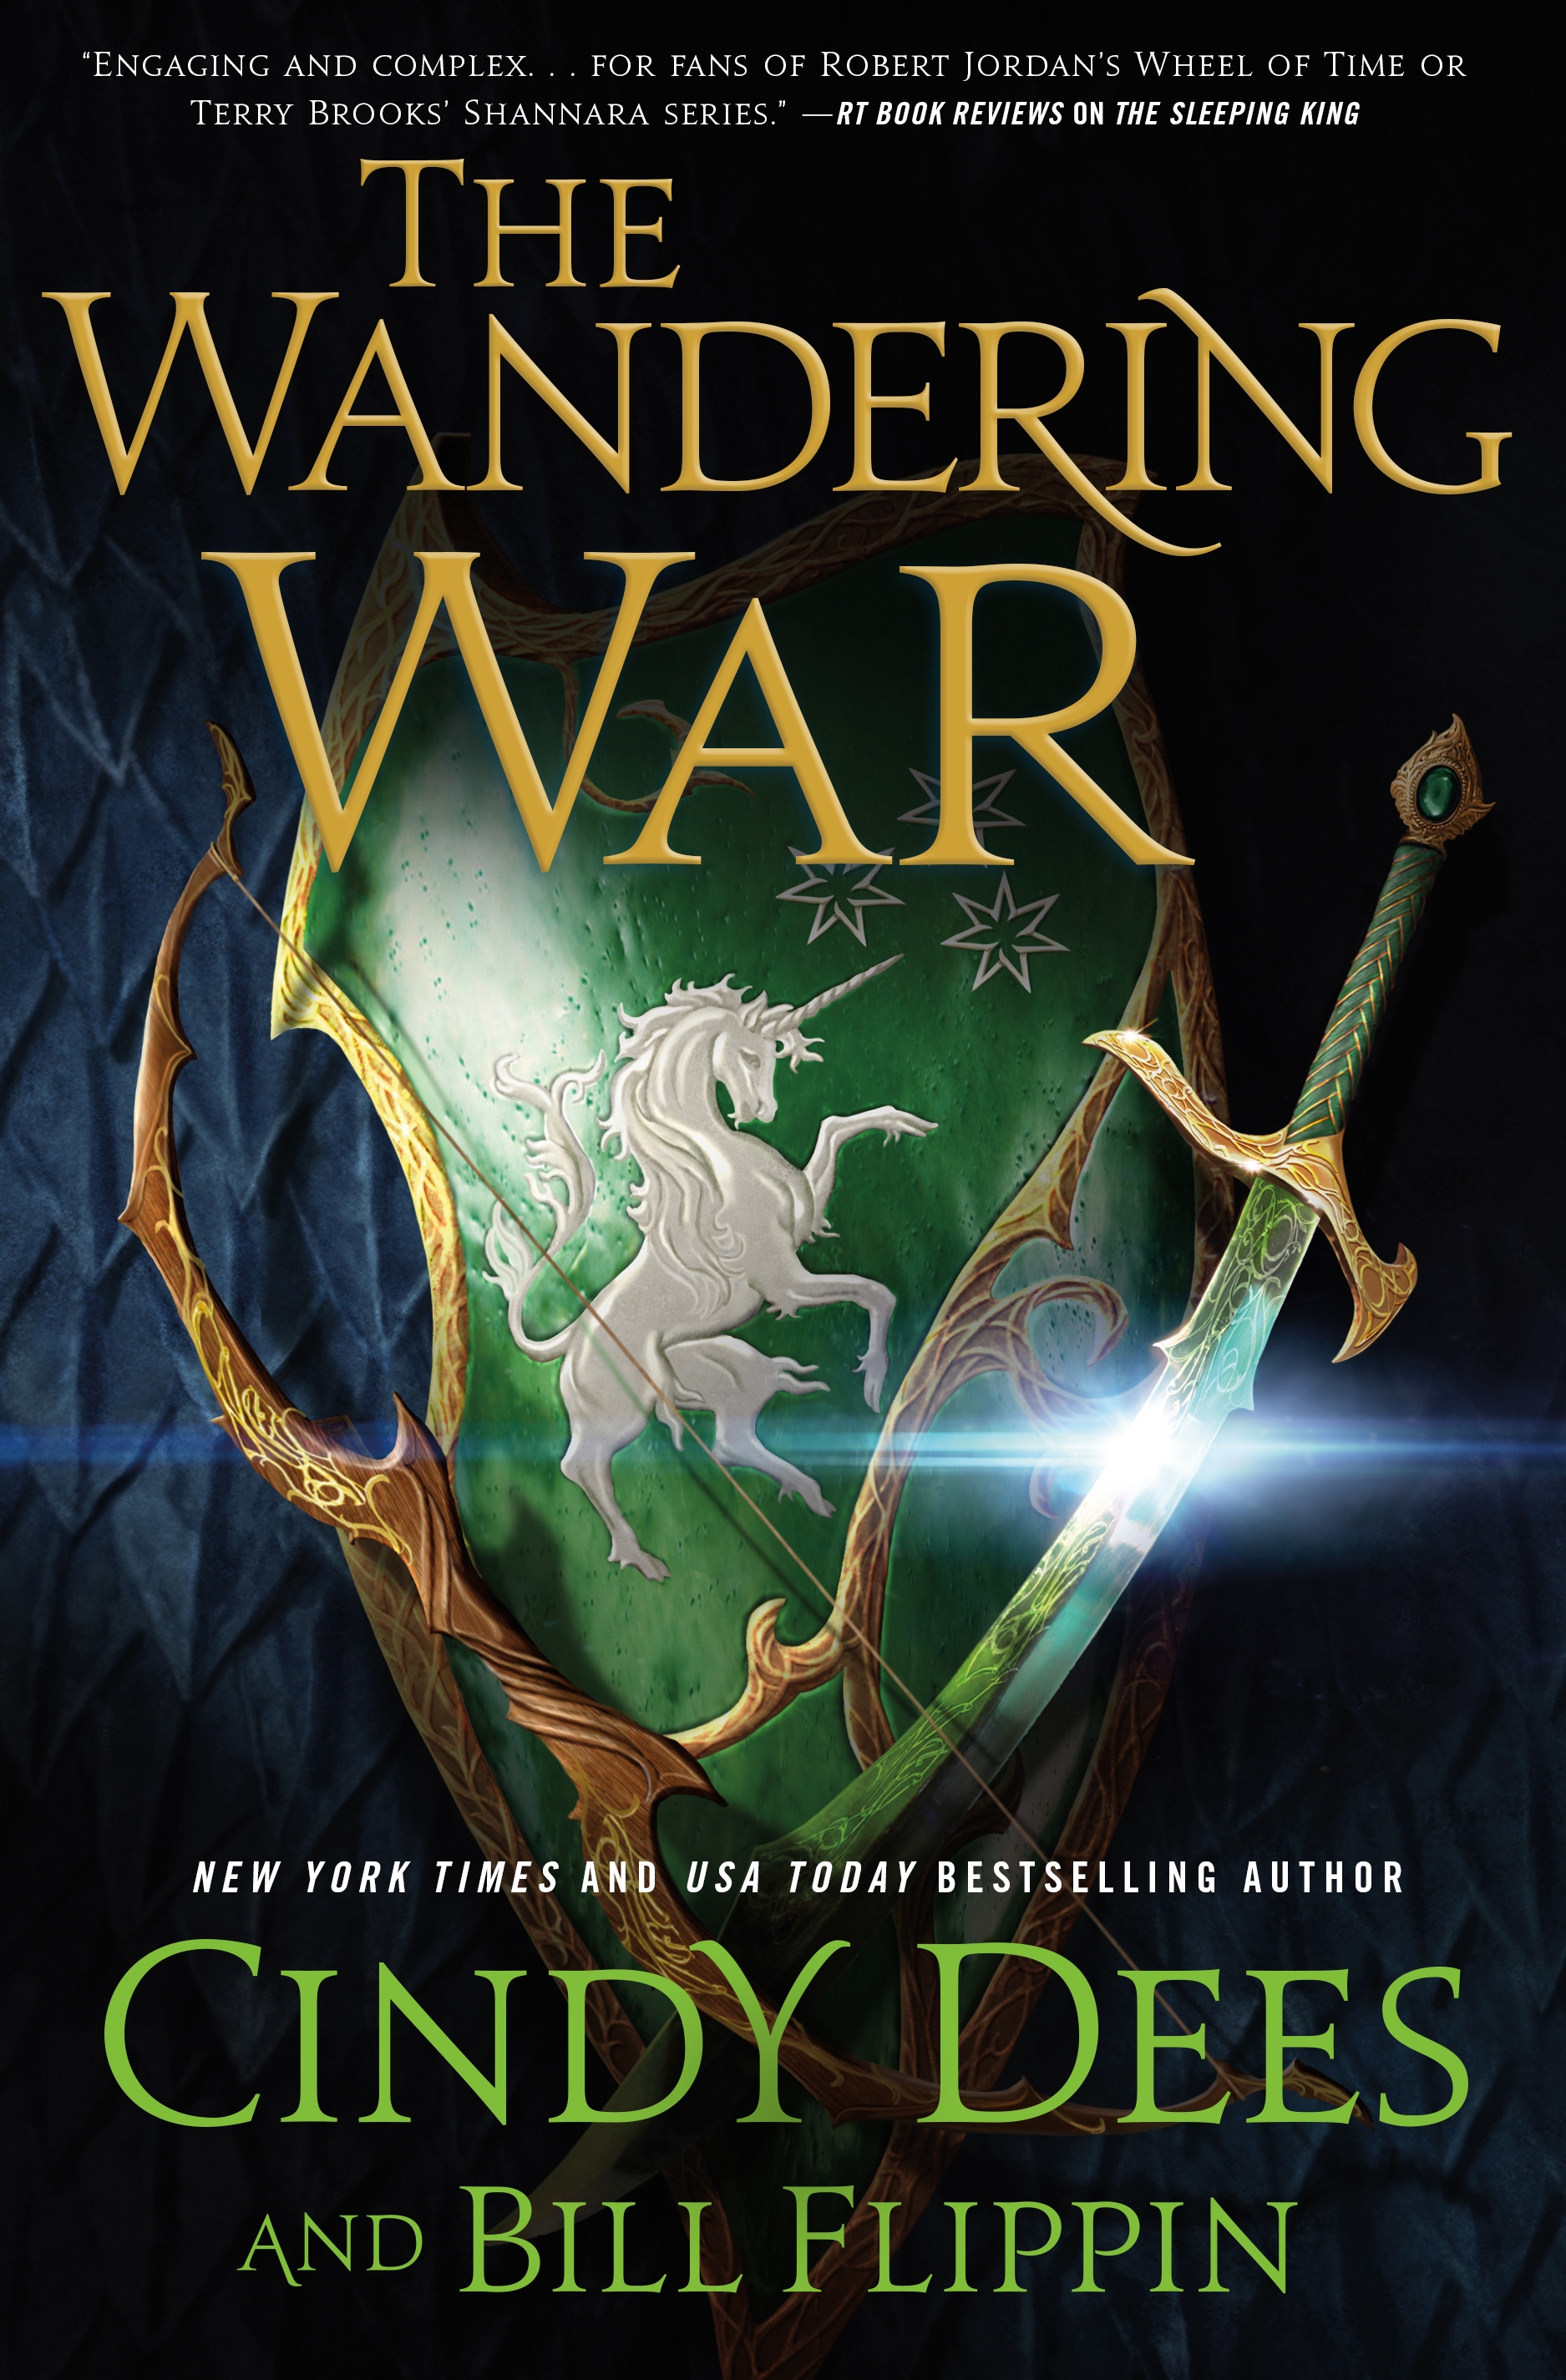 The Wandering War : The Sleeping King Trilogy, Book 3 by Cindy Dees, Bill Flippin